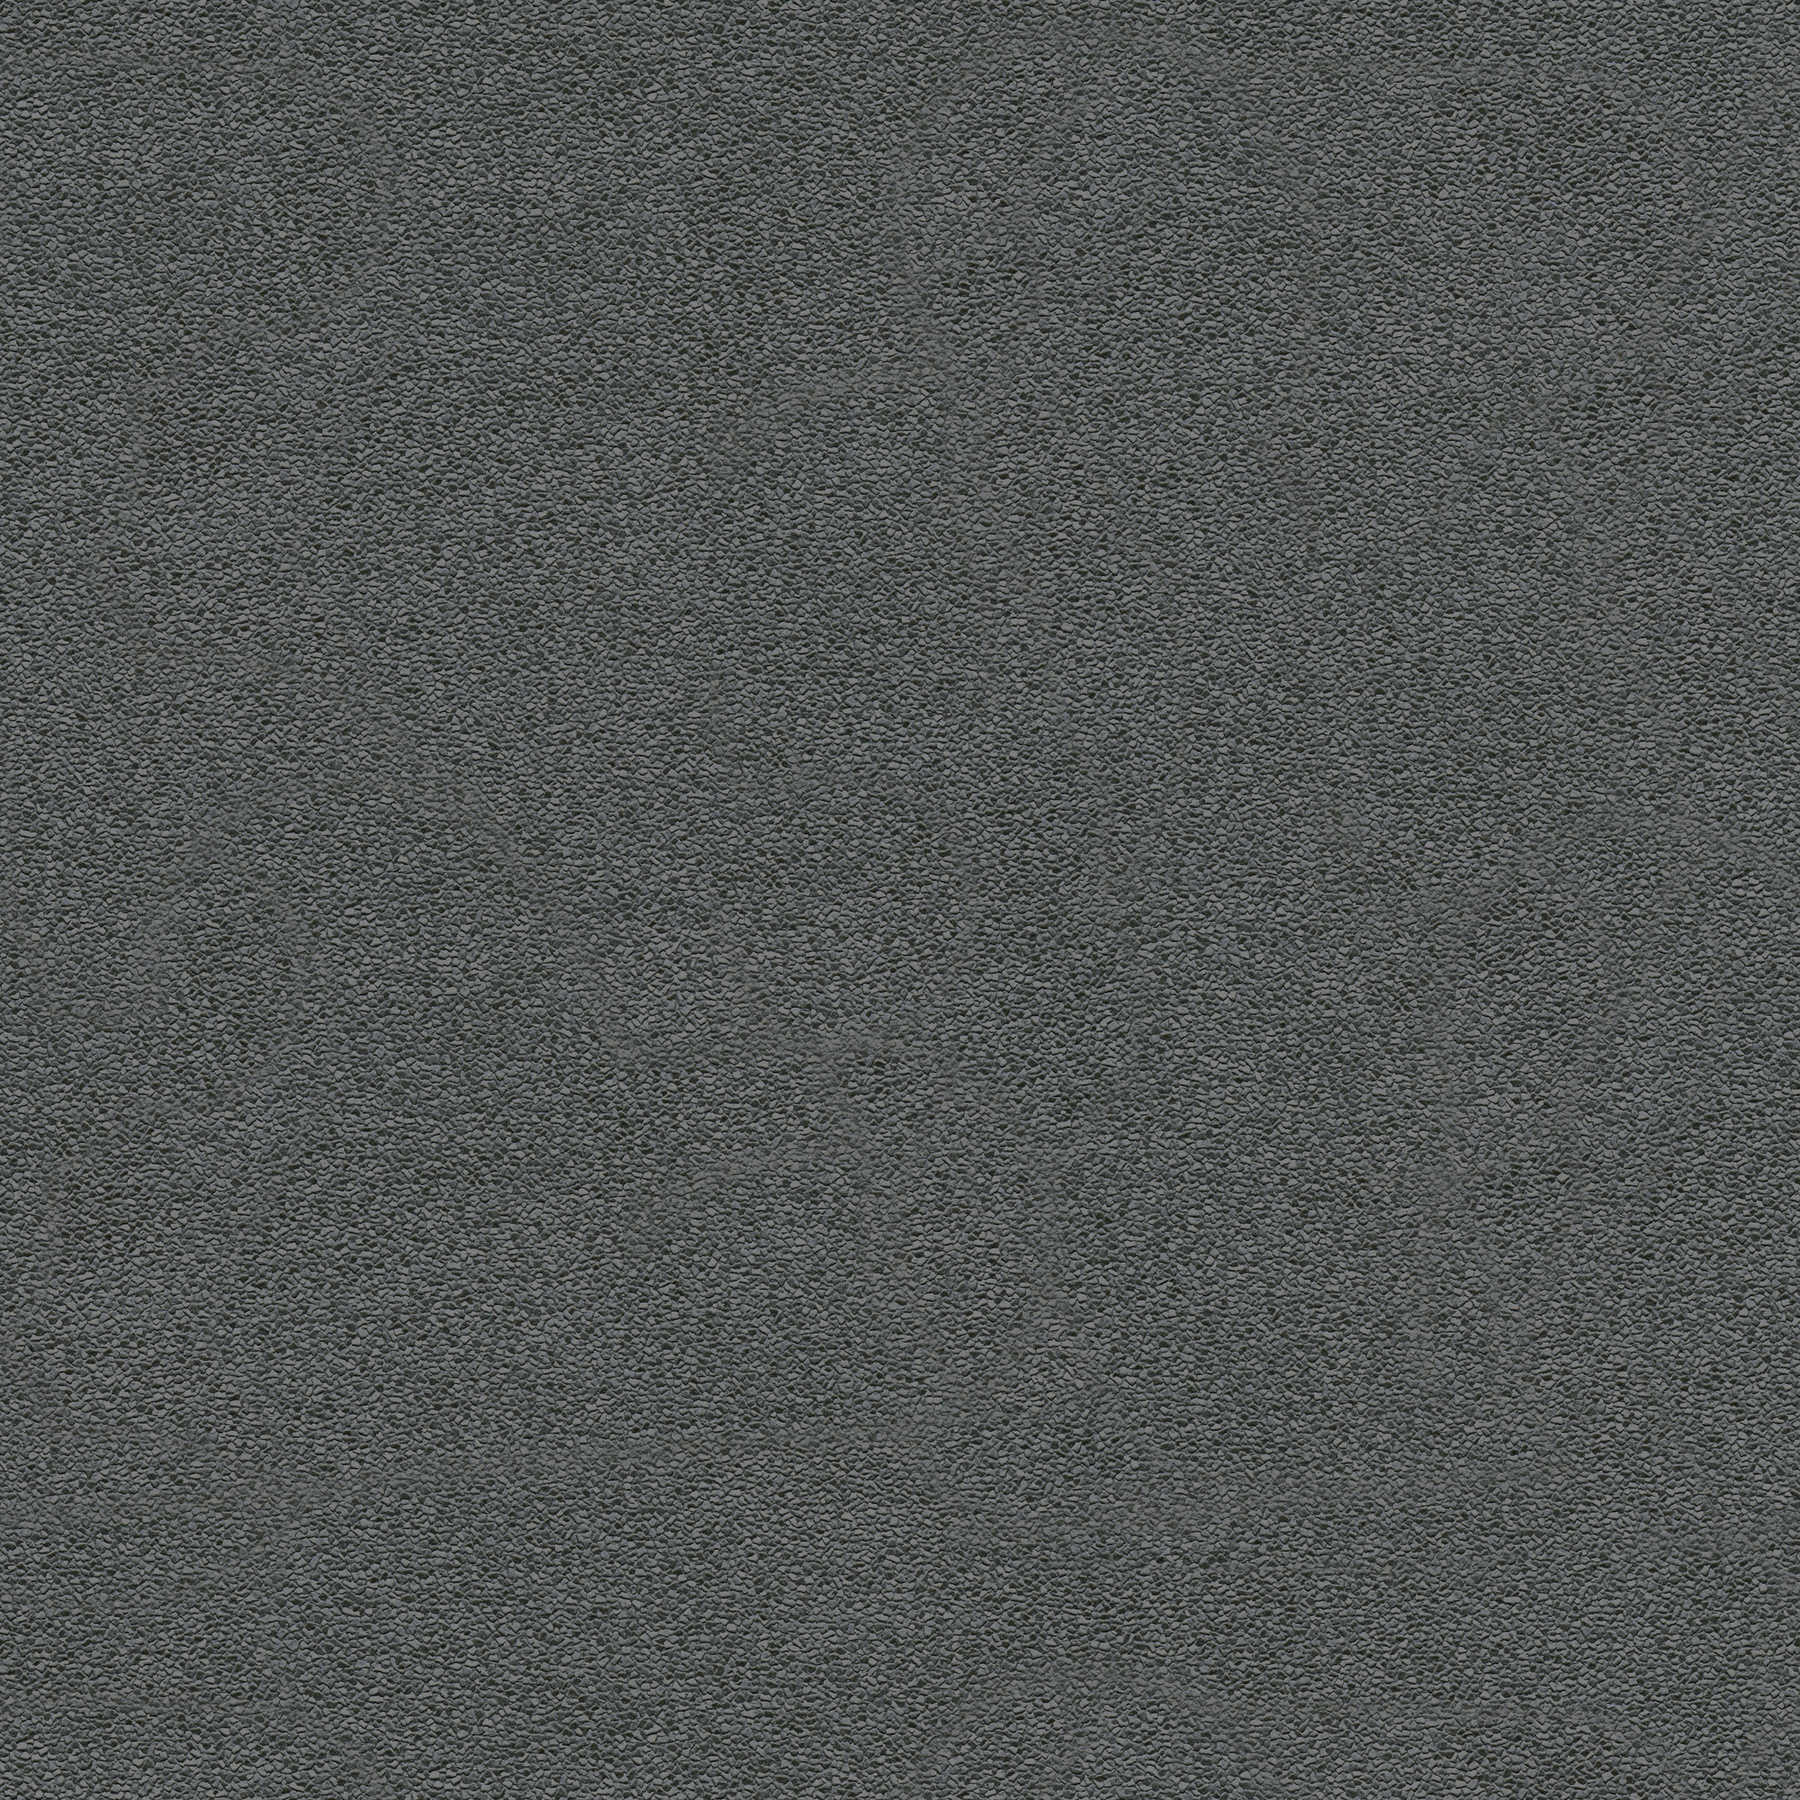 Non-woven wallpaper anthracite with asphalt look & structure embossing
